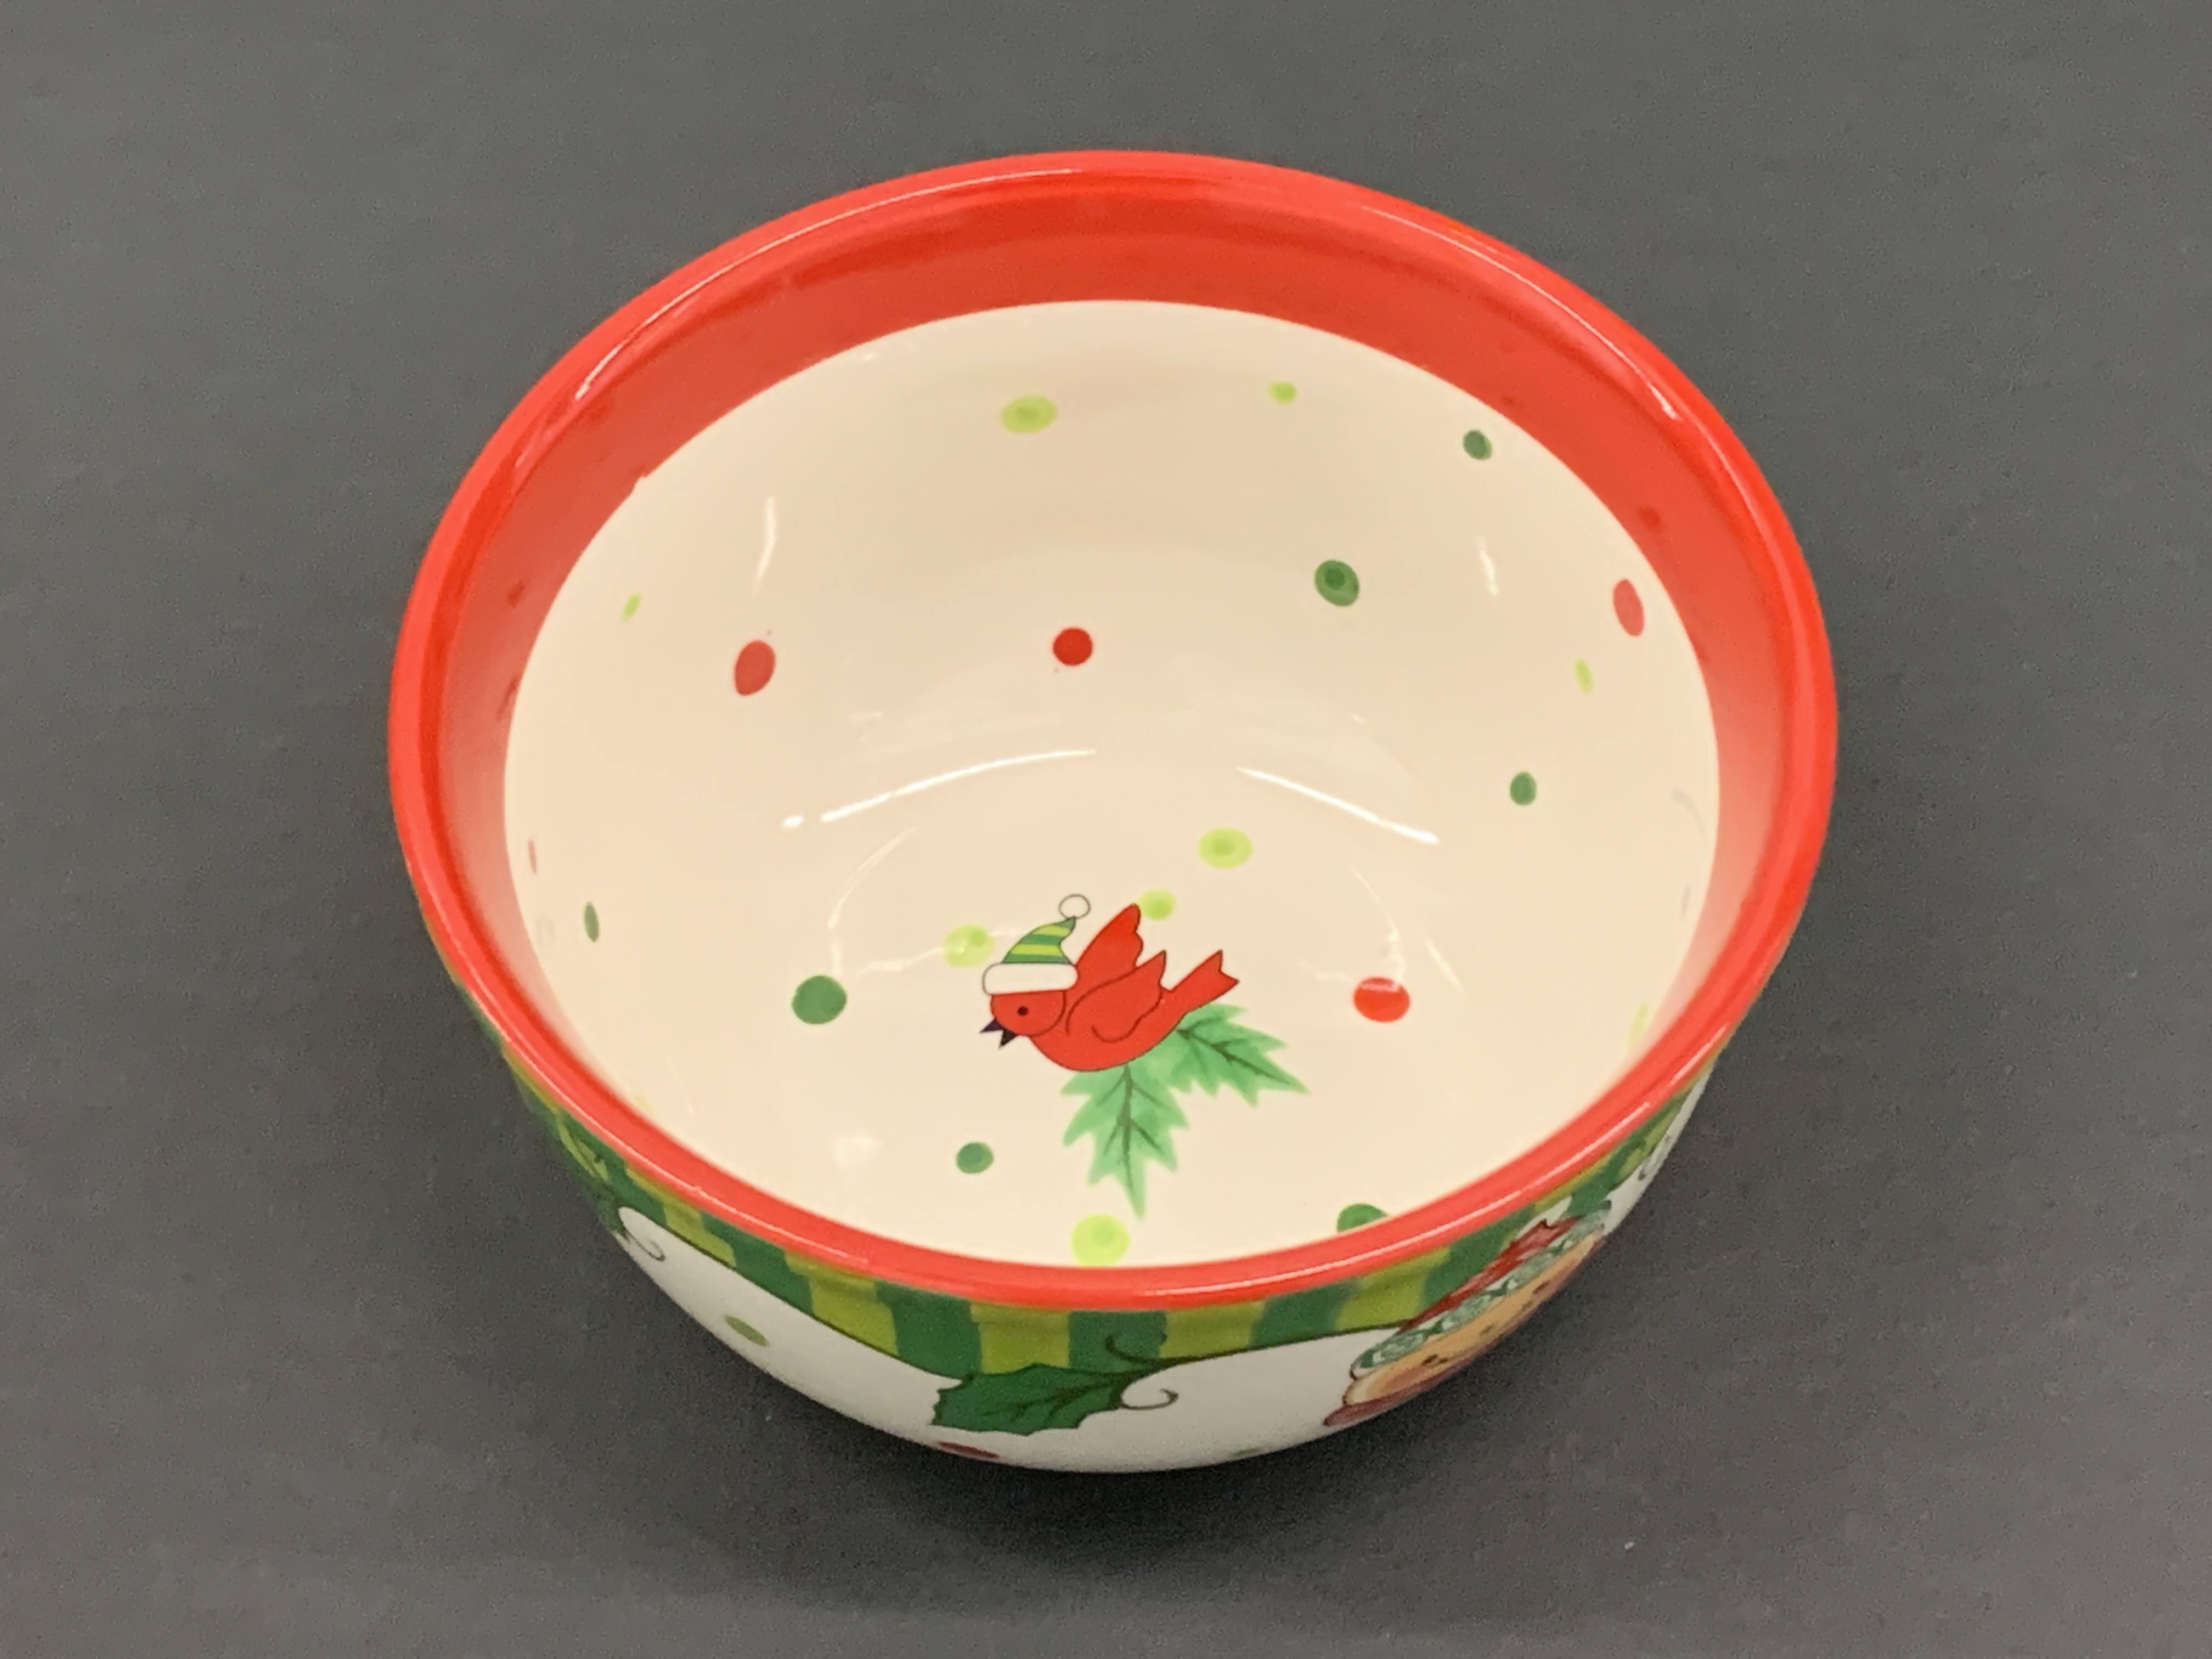 Holiday Snowman Pattern - Ceramic Porcelain Cookie Bowl With Plastic Lid - 6"